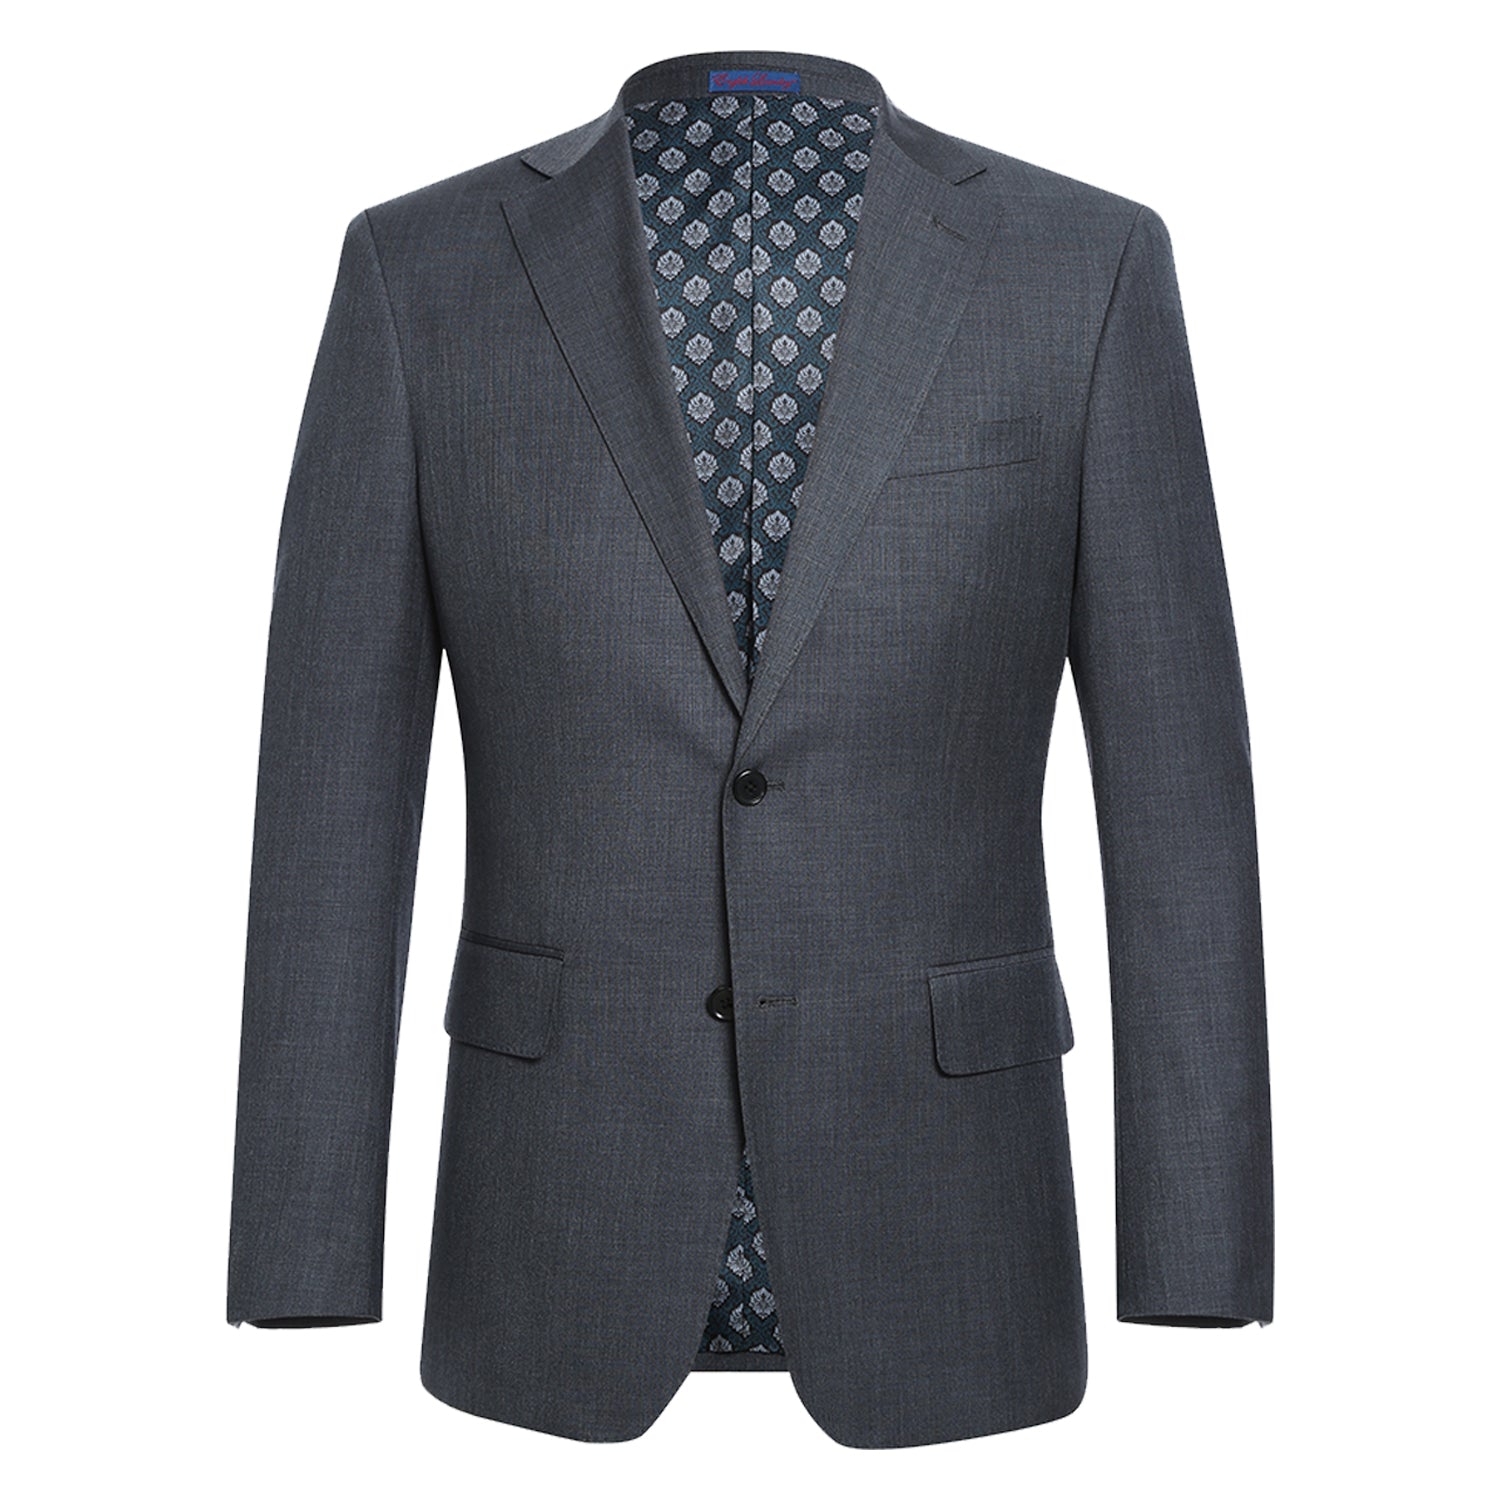 English Laundry Solid Charcoal Notch Suit 2